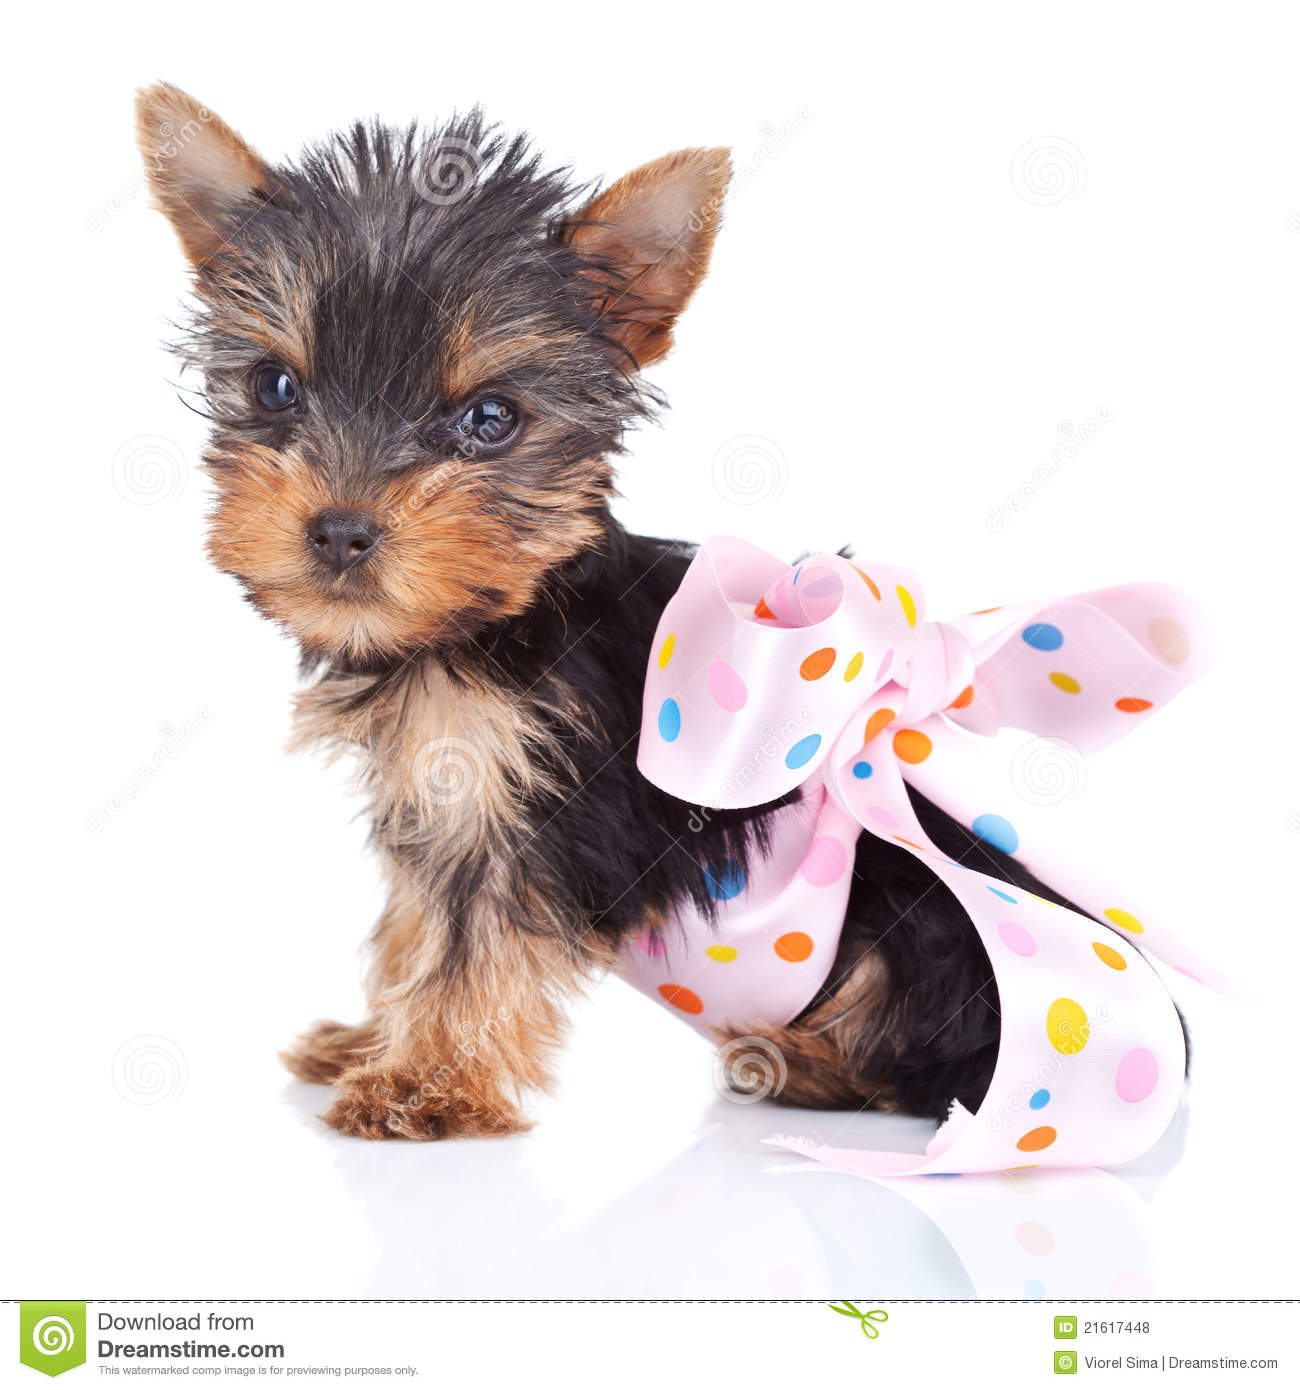 Yorkie Toy In A Pinky Bow Royalty Free Stock Photos   Image  21617448